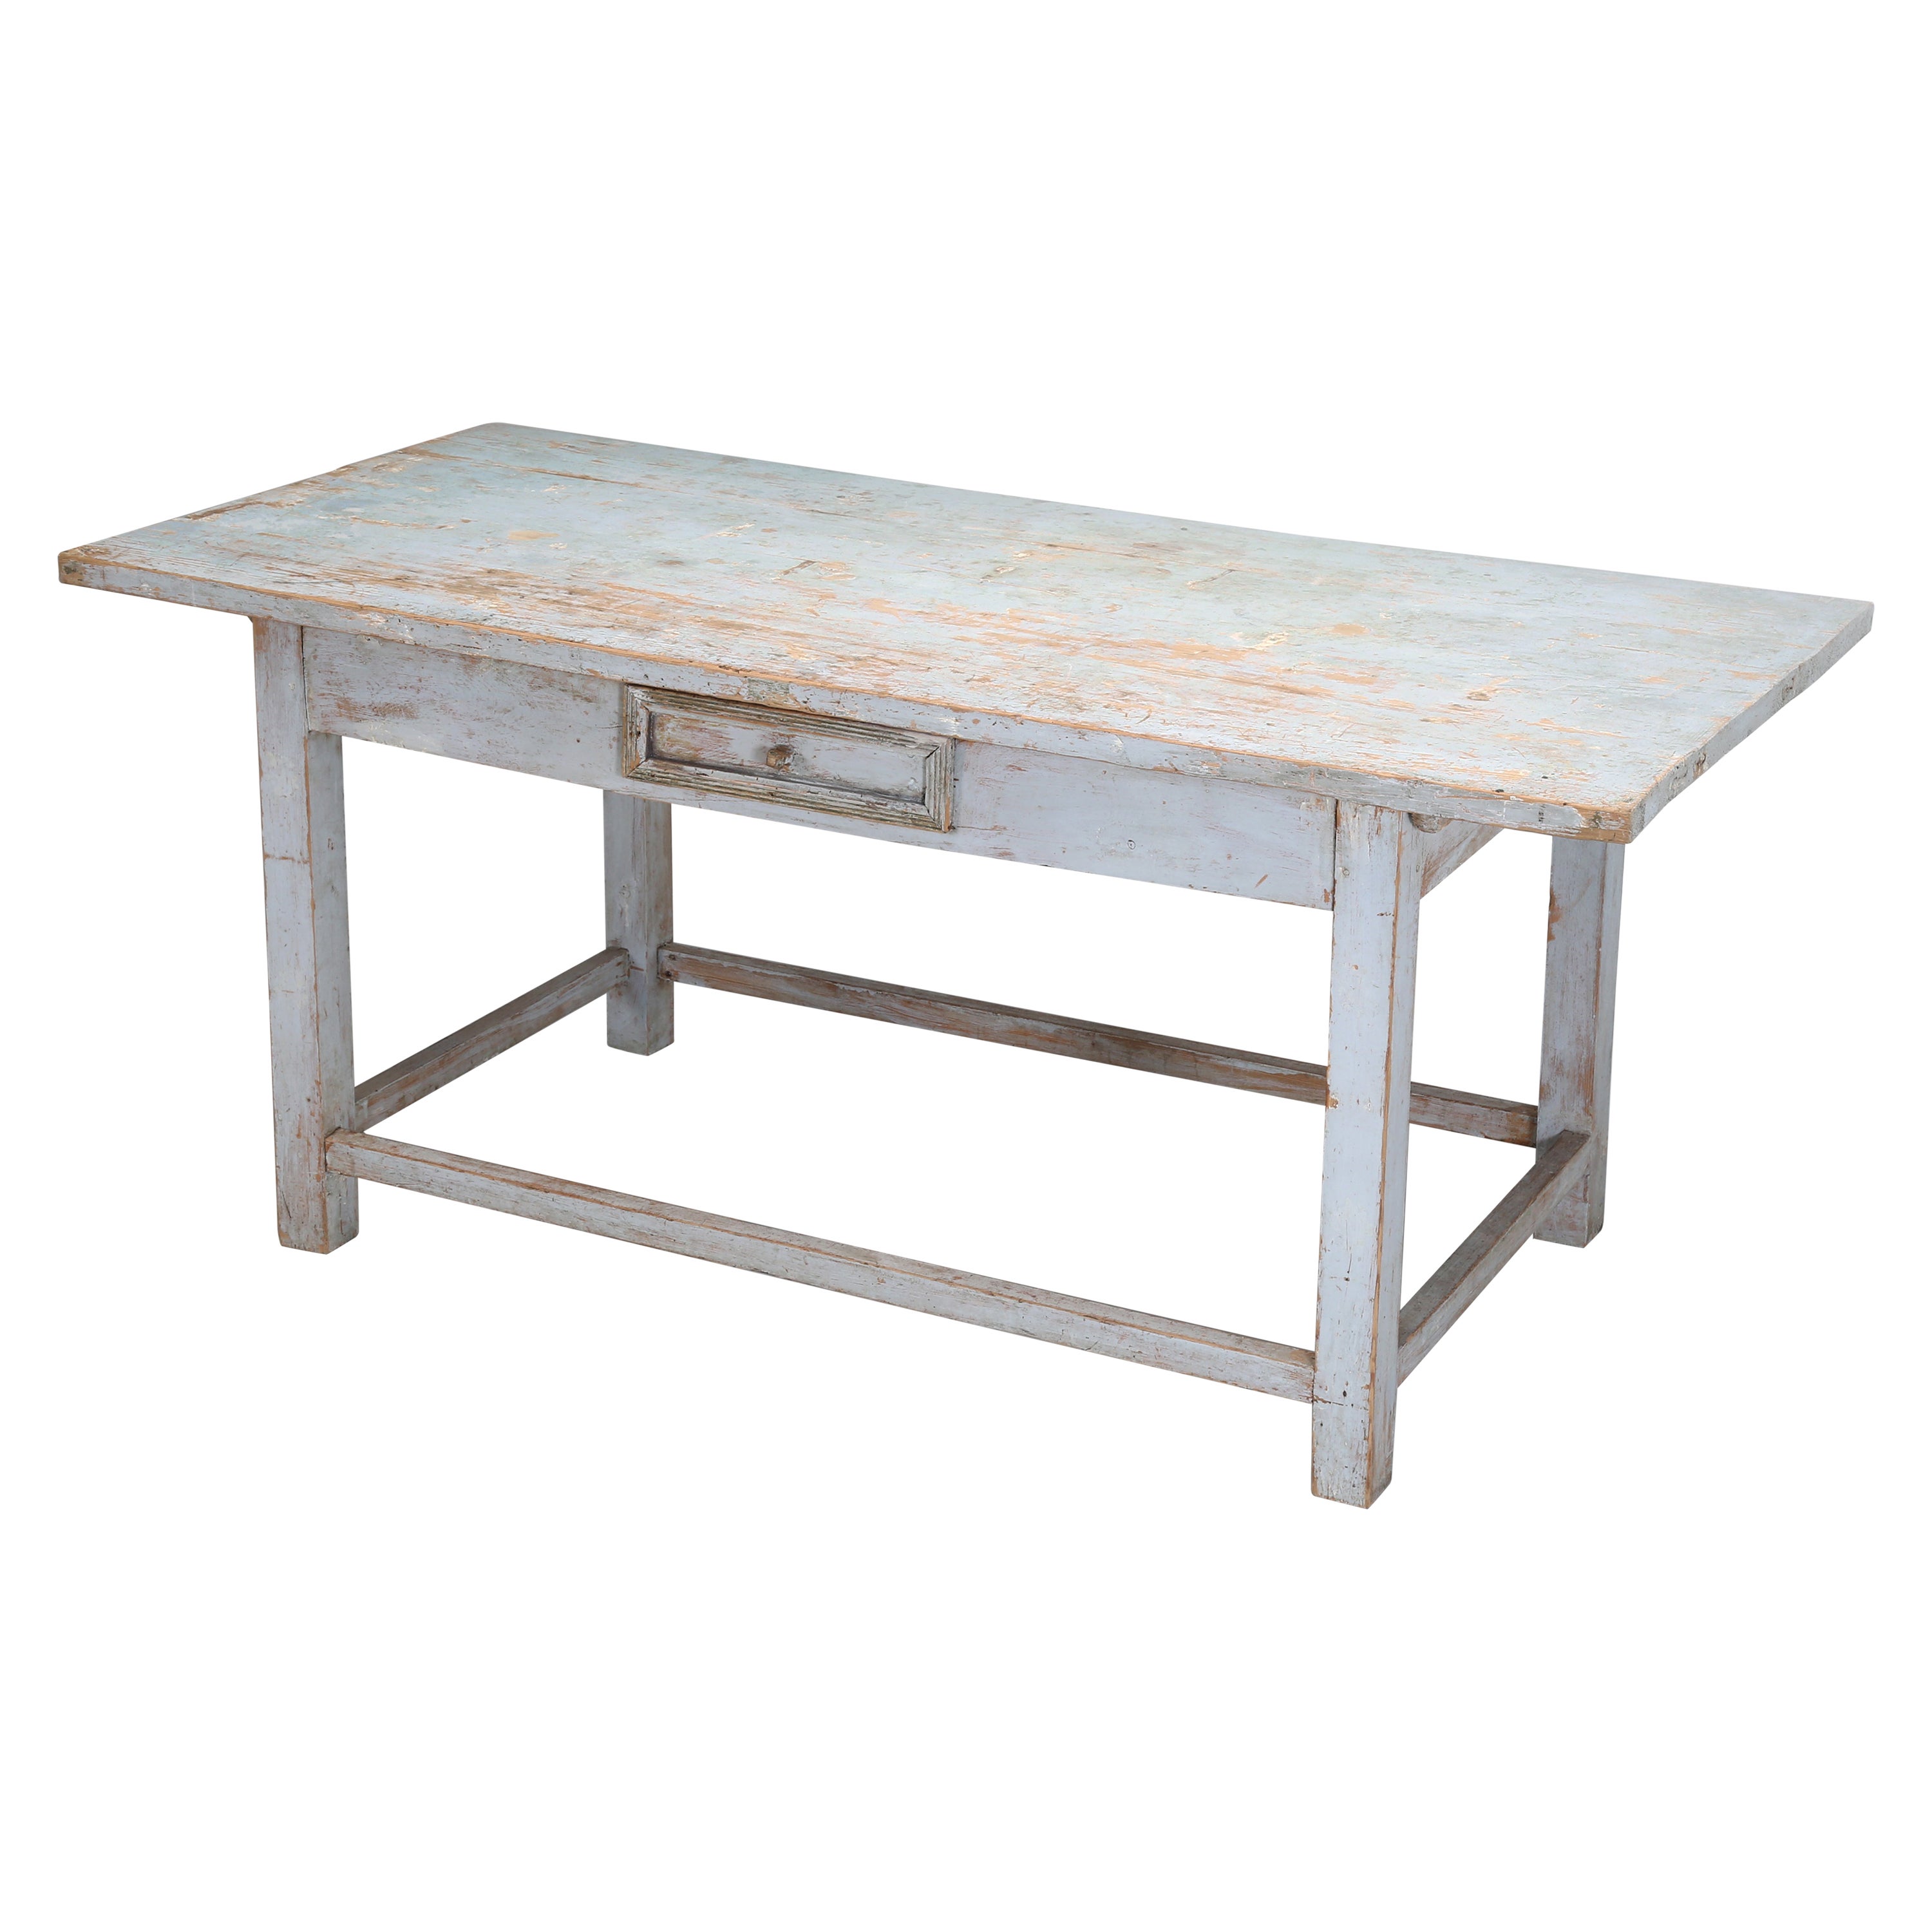 Antique Swedish Painted Table That Would Make for a Great Looking Kitchen Island For Sale